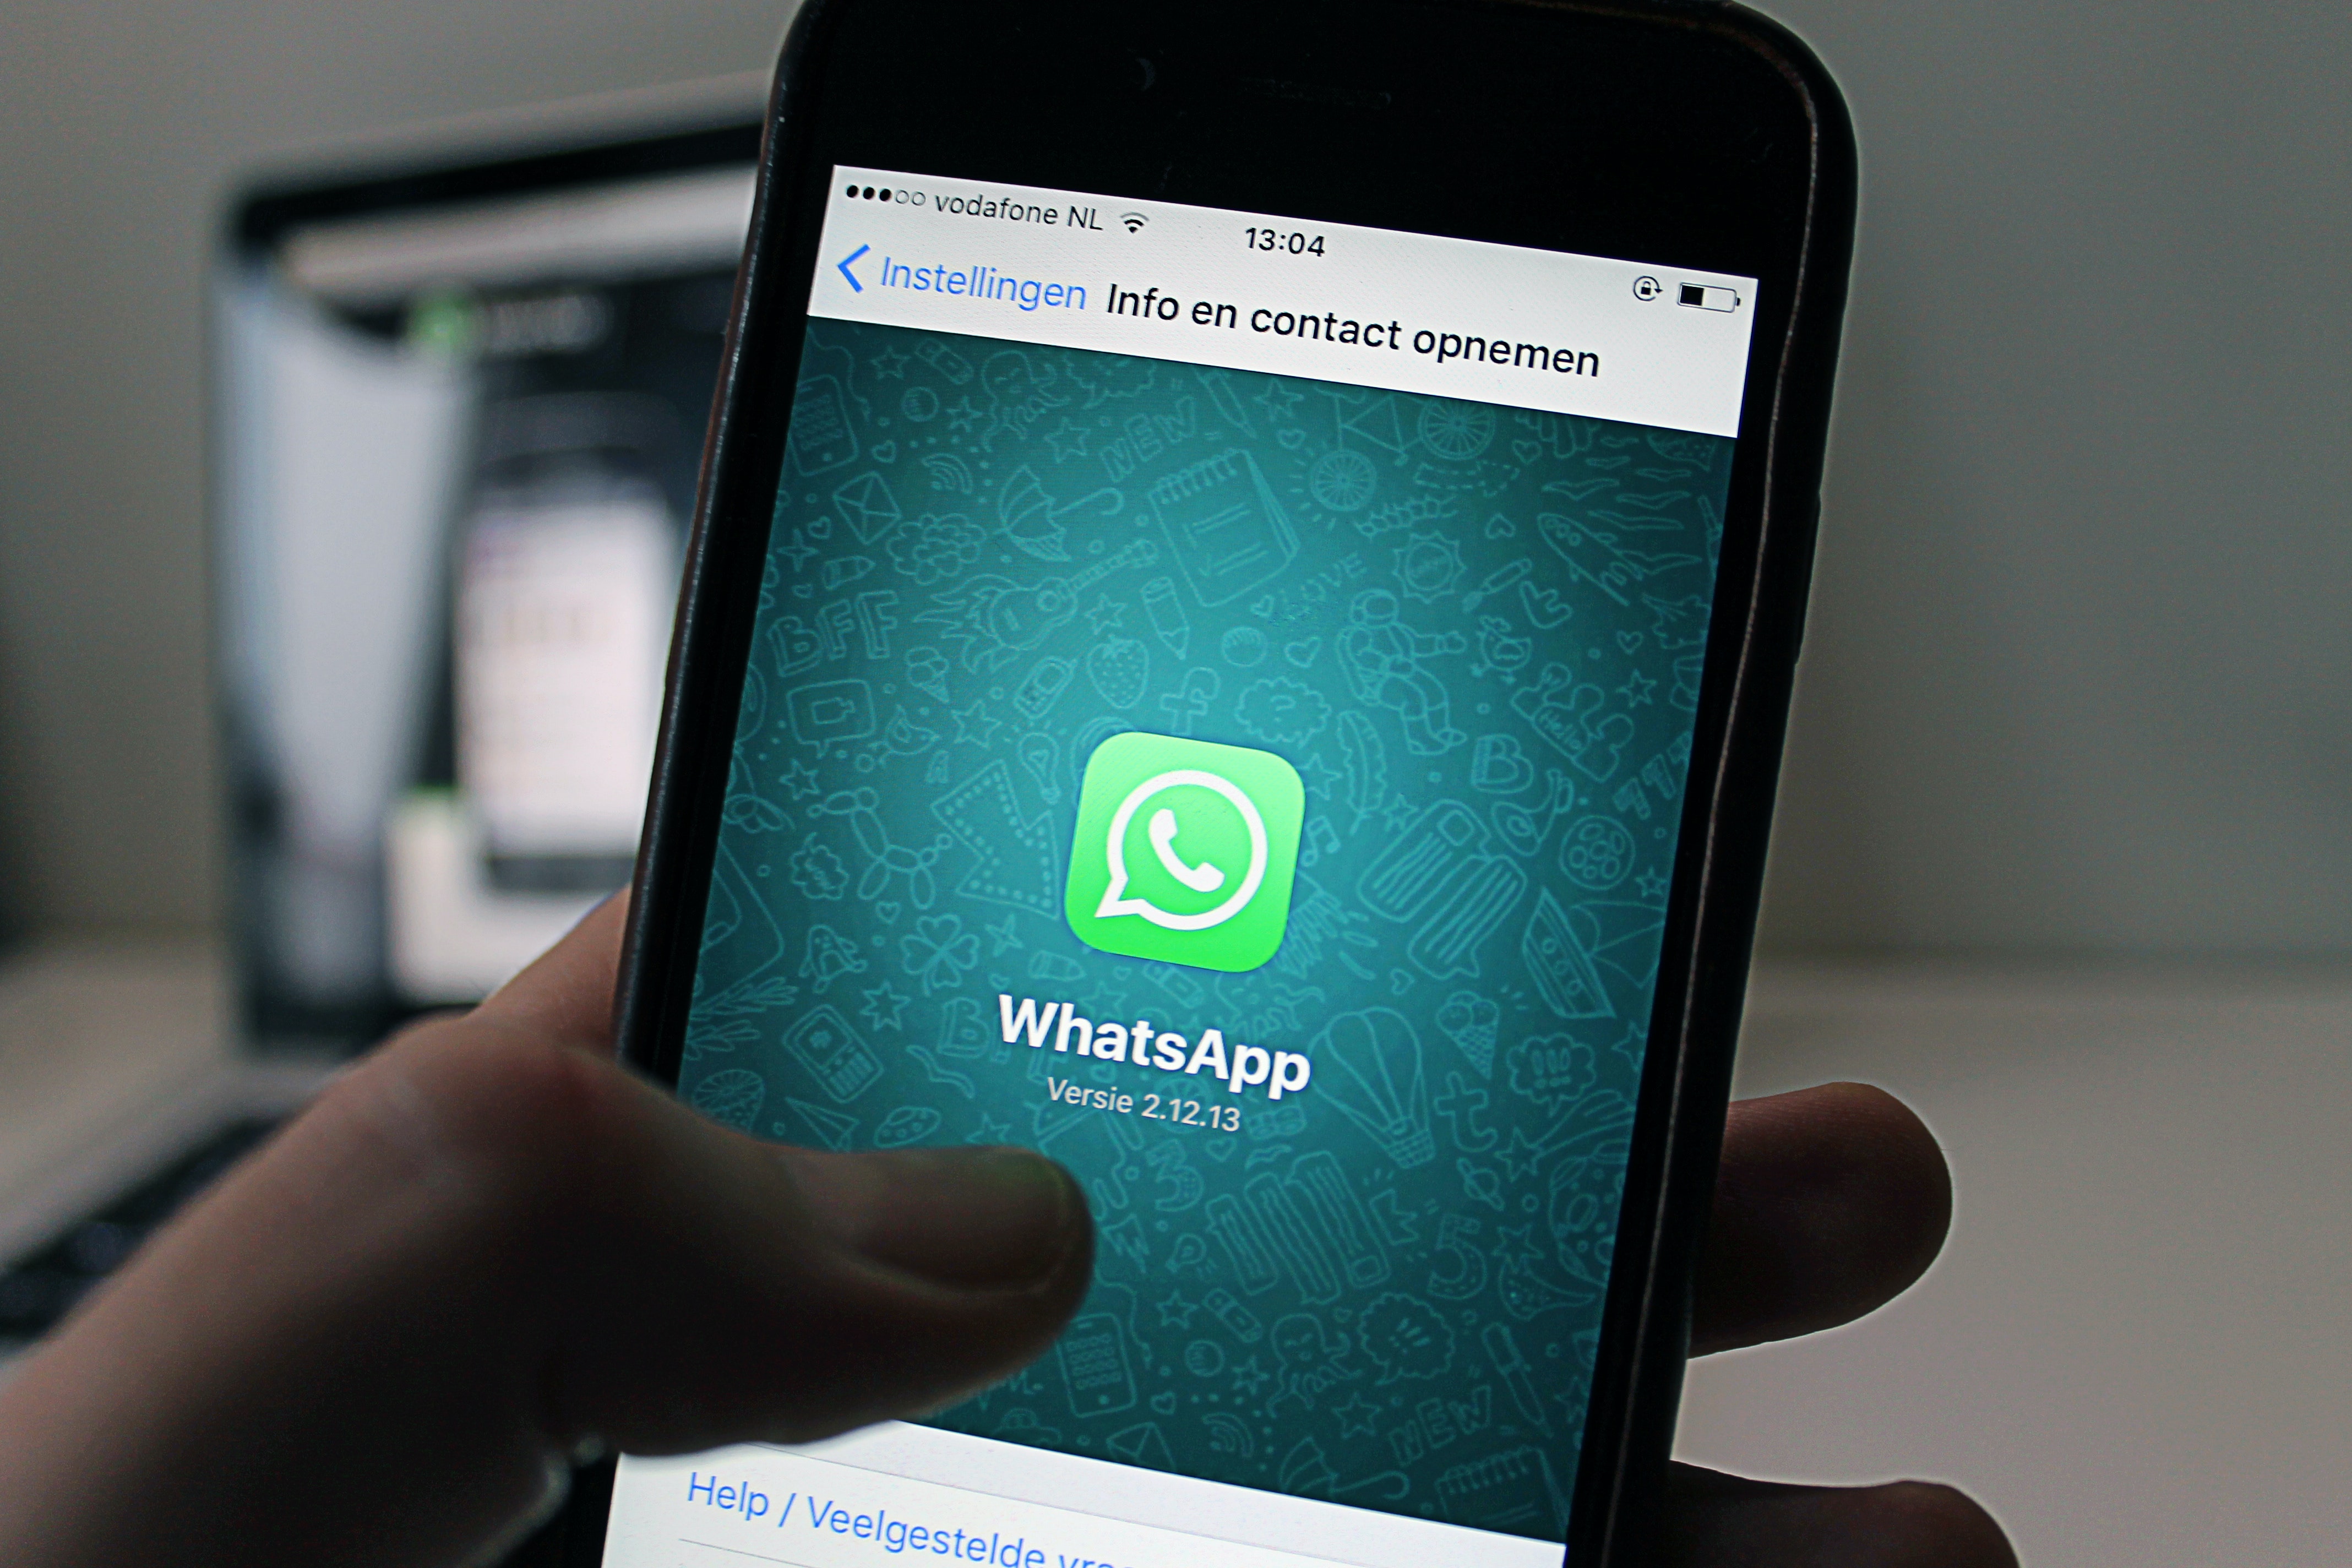 What's wrong with WhatsApp?